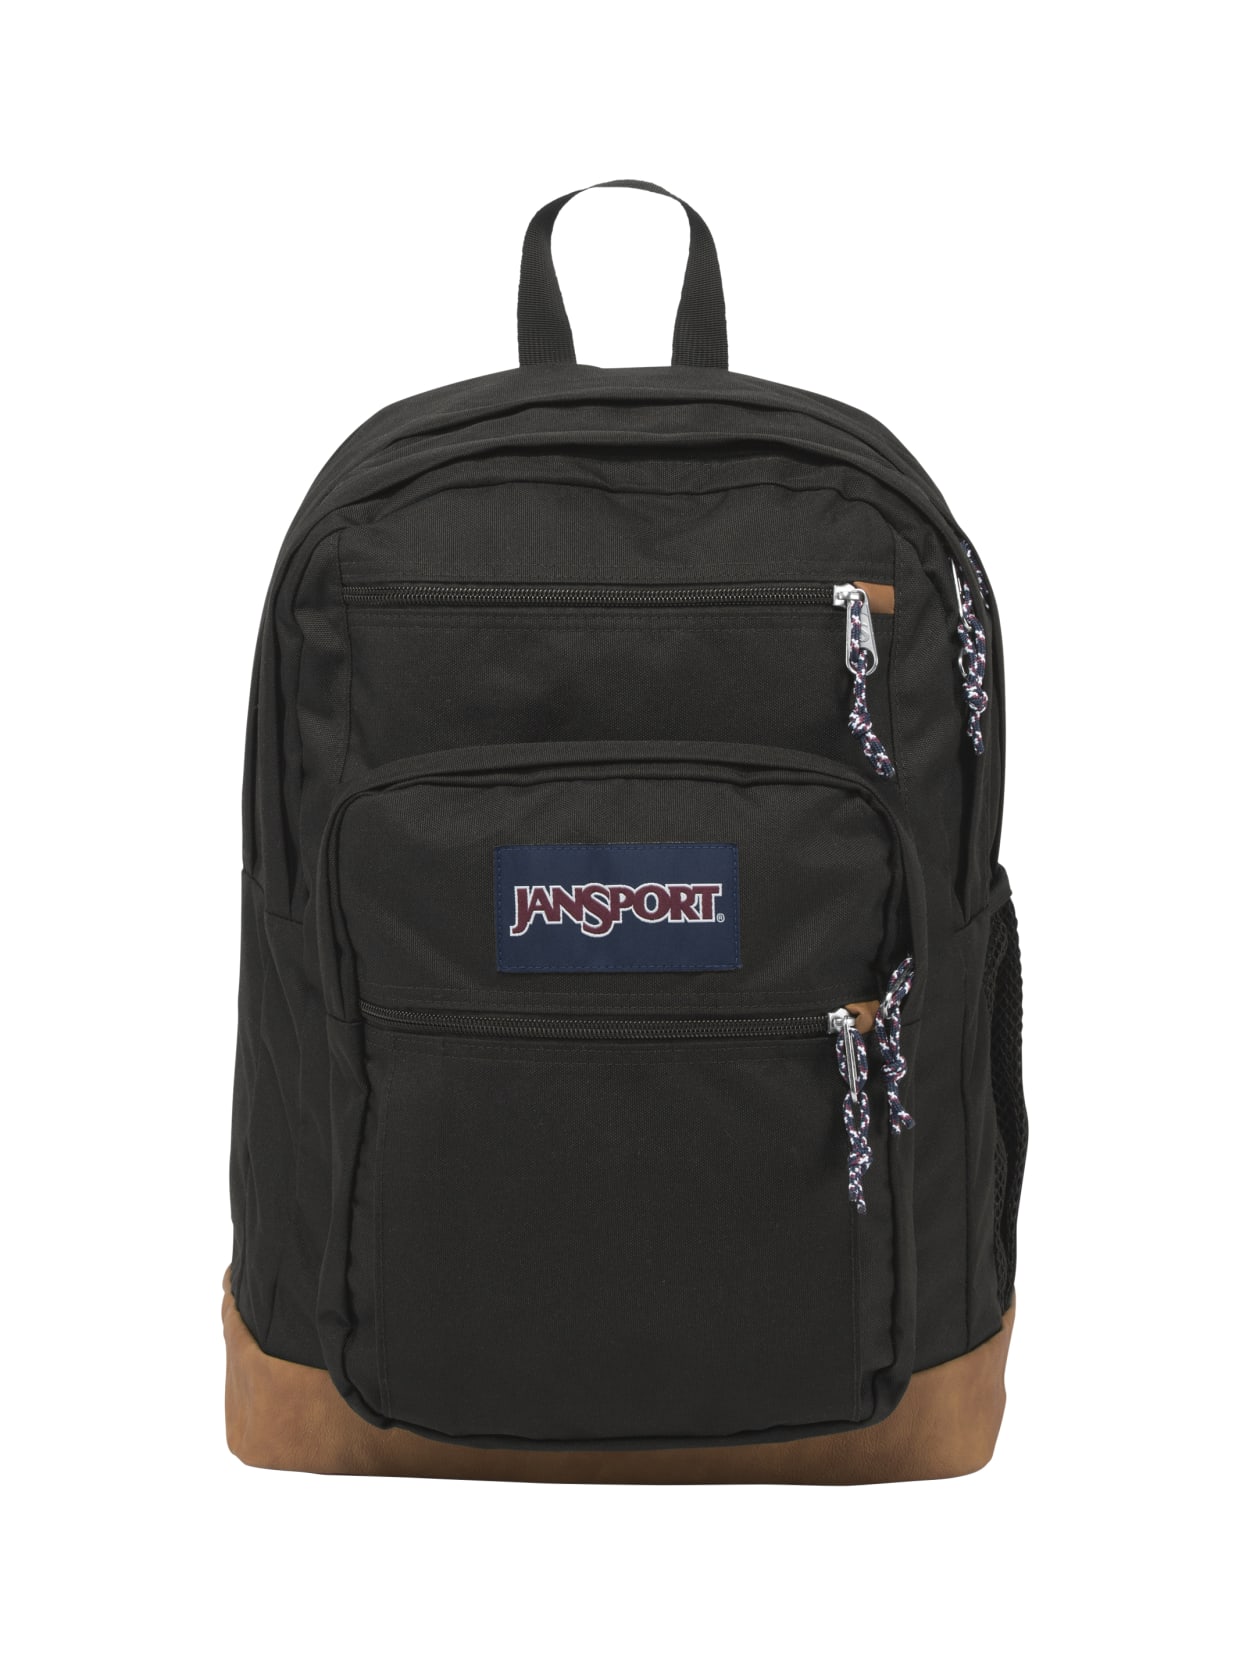 jansport backpack with computer sleeve